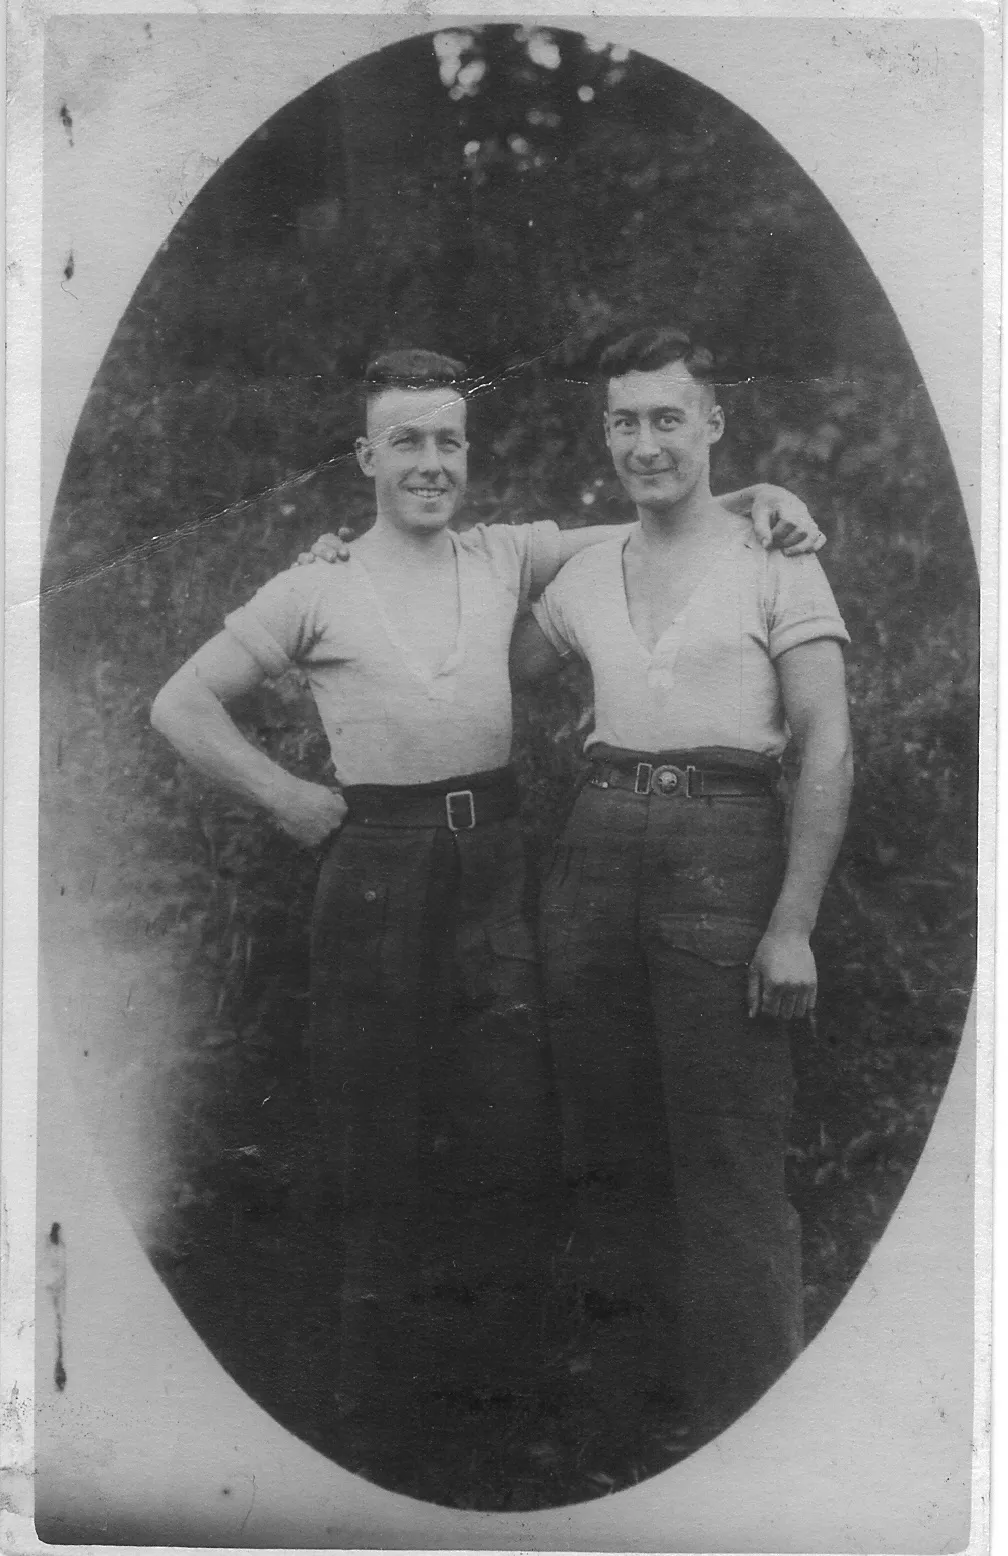 A Lovell & Jack Pegg as POWs